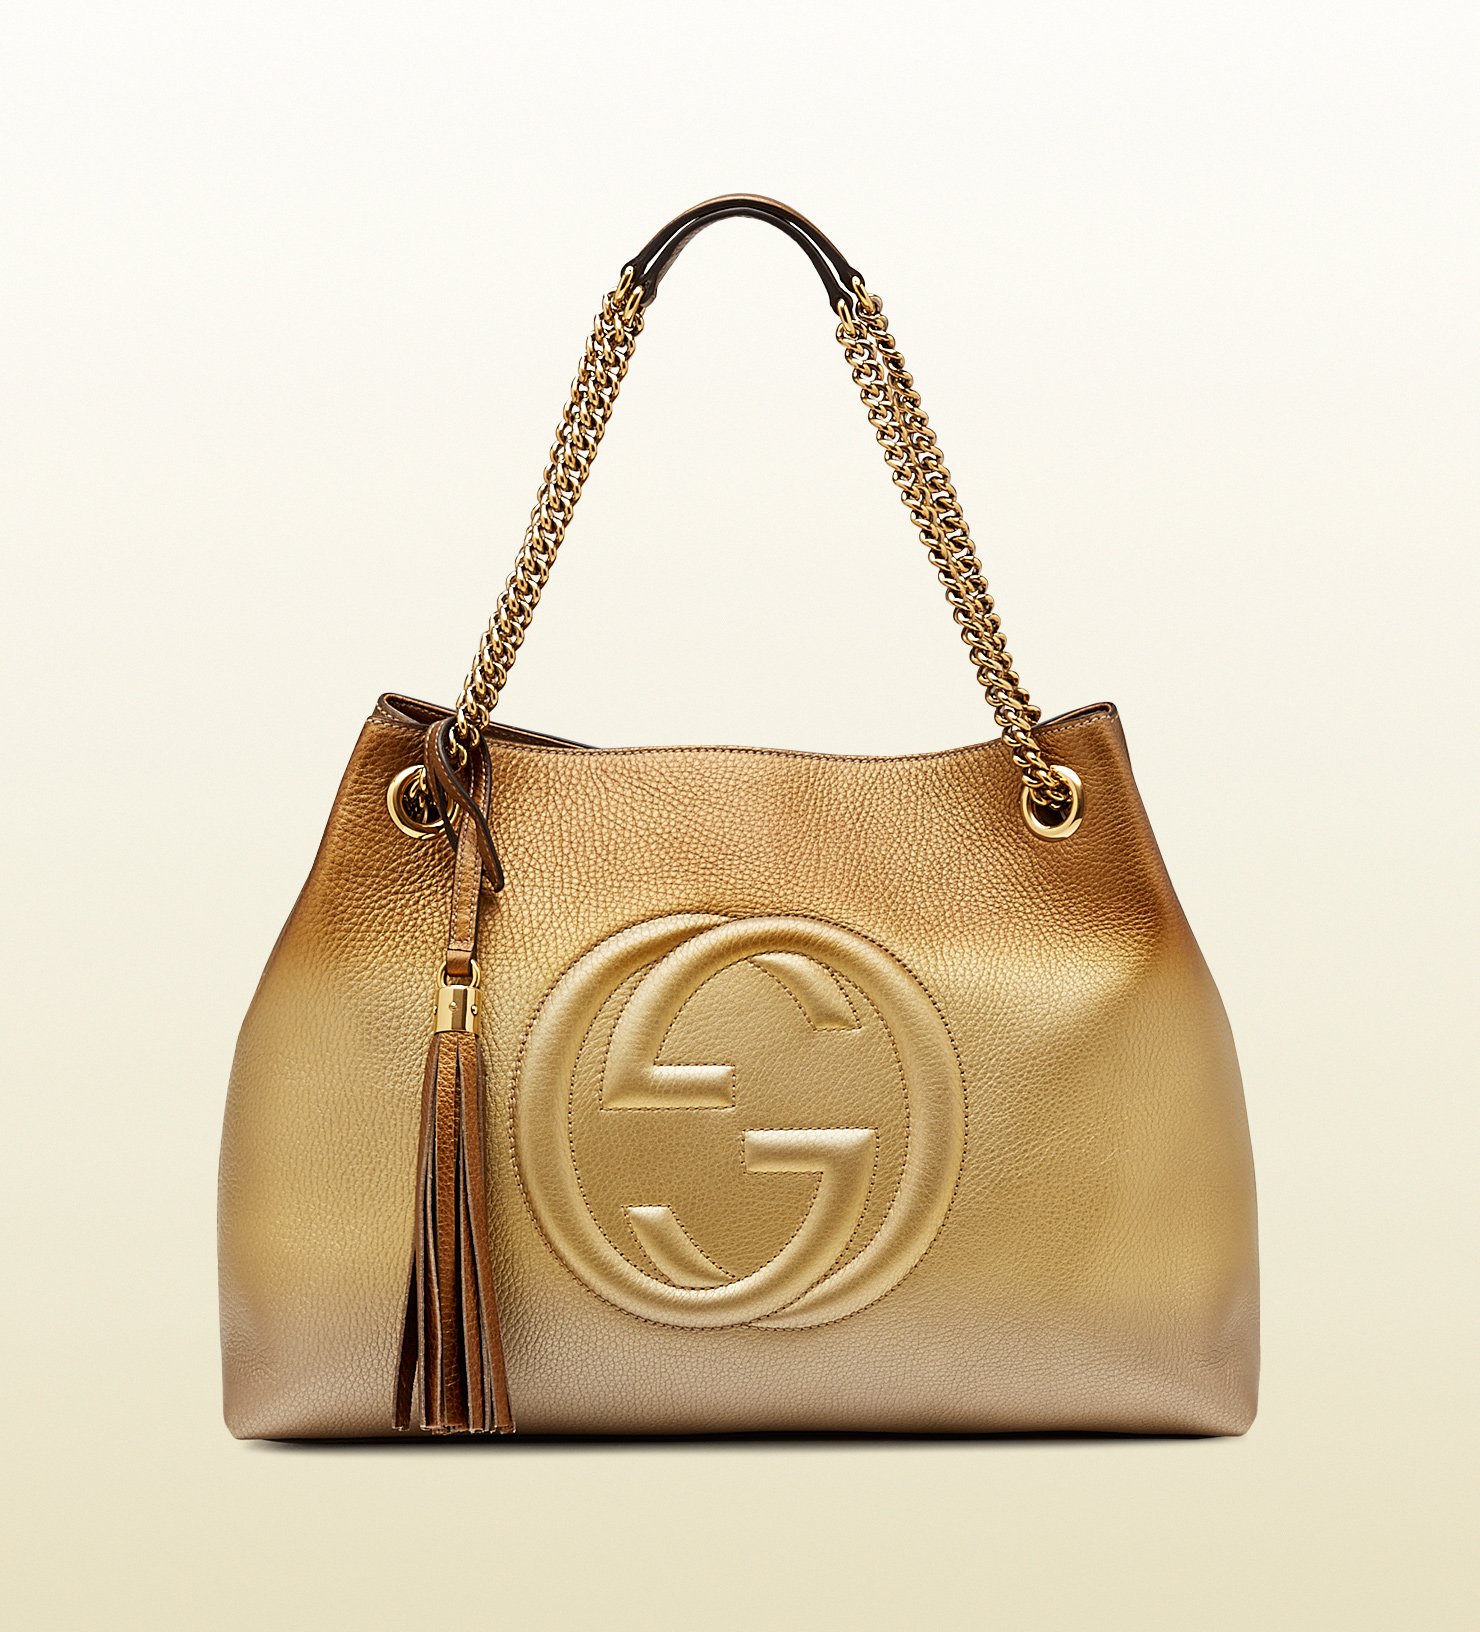 Lyst - Gucci Soho Shaded Leather Shoulder Bag in Metallic